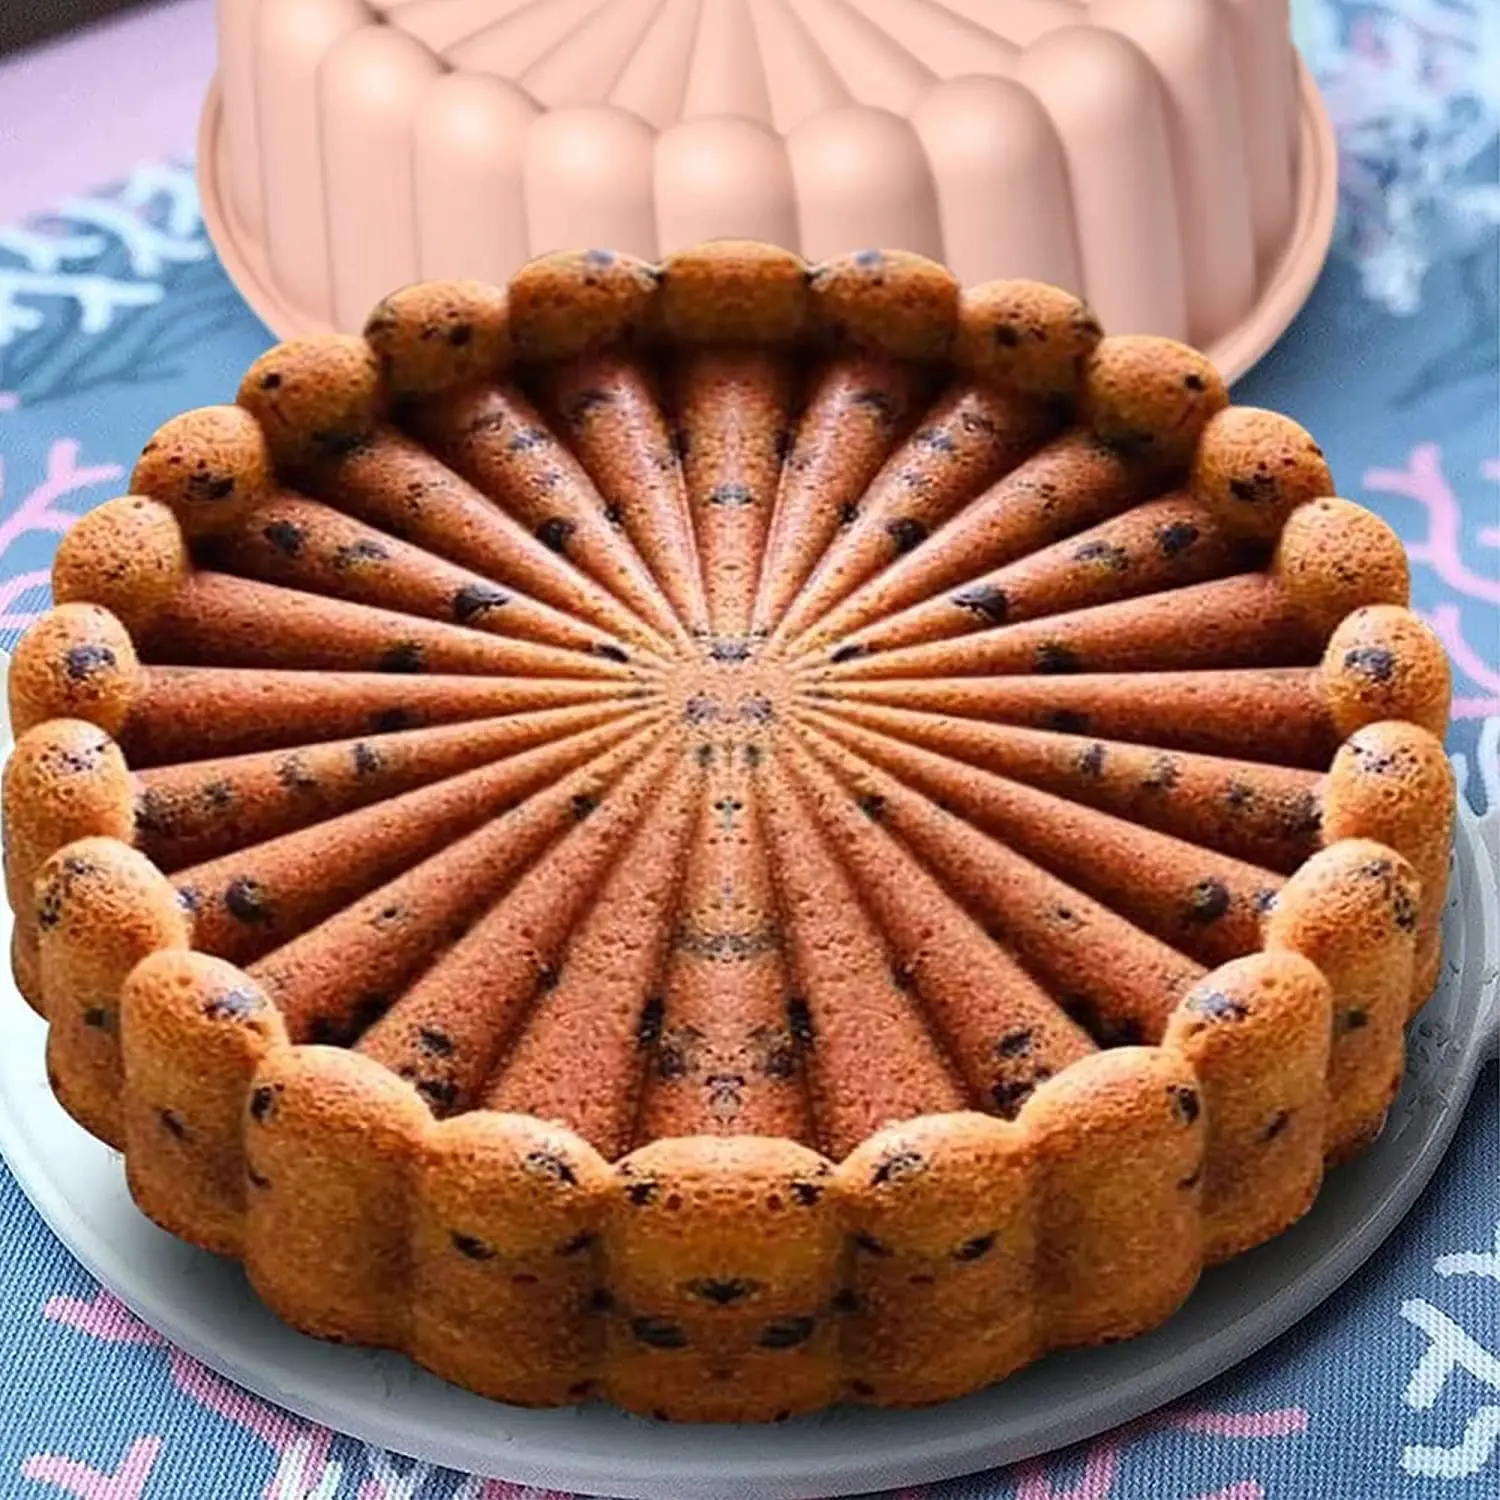 https://ae01.alicdn.com/kf/S959c031fce614c30aa4a520376c8d7c5w/Silicone-Charlotte-Cake-Pan-Reusable-Mold-Fluted-Cake-Pan-Nonstick-Round-Molds-For-Shortcake-Cheesecake-Brownie.jpg